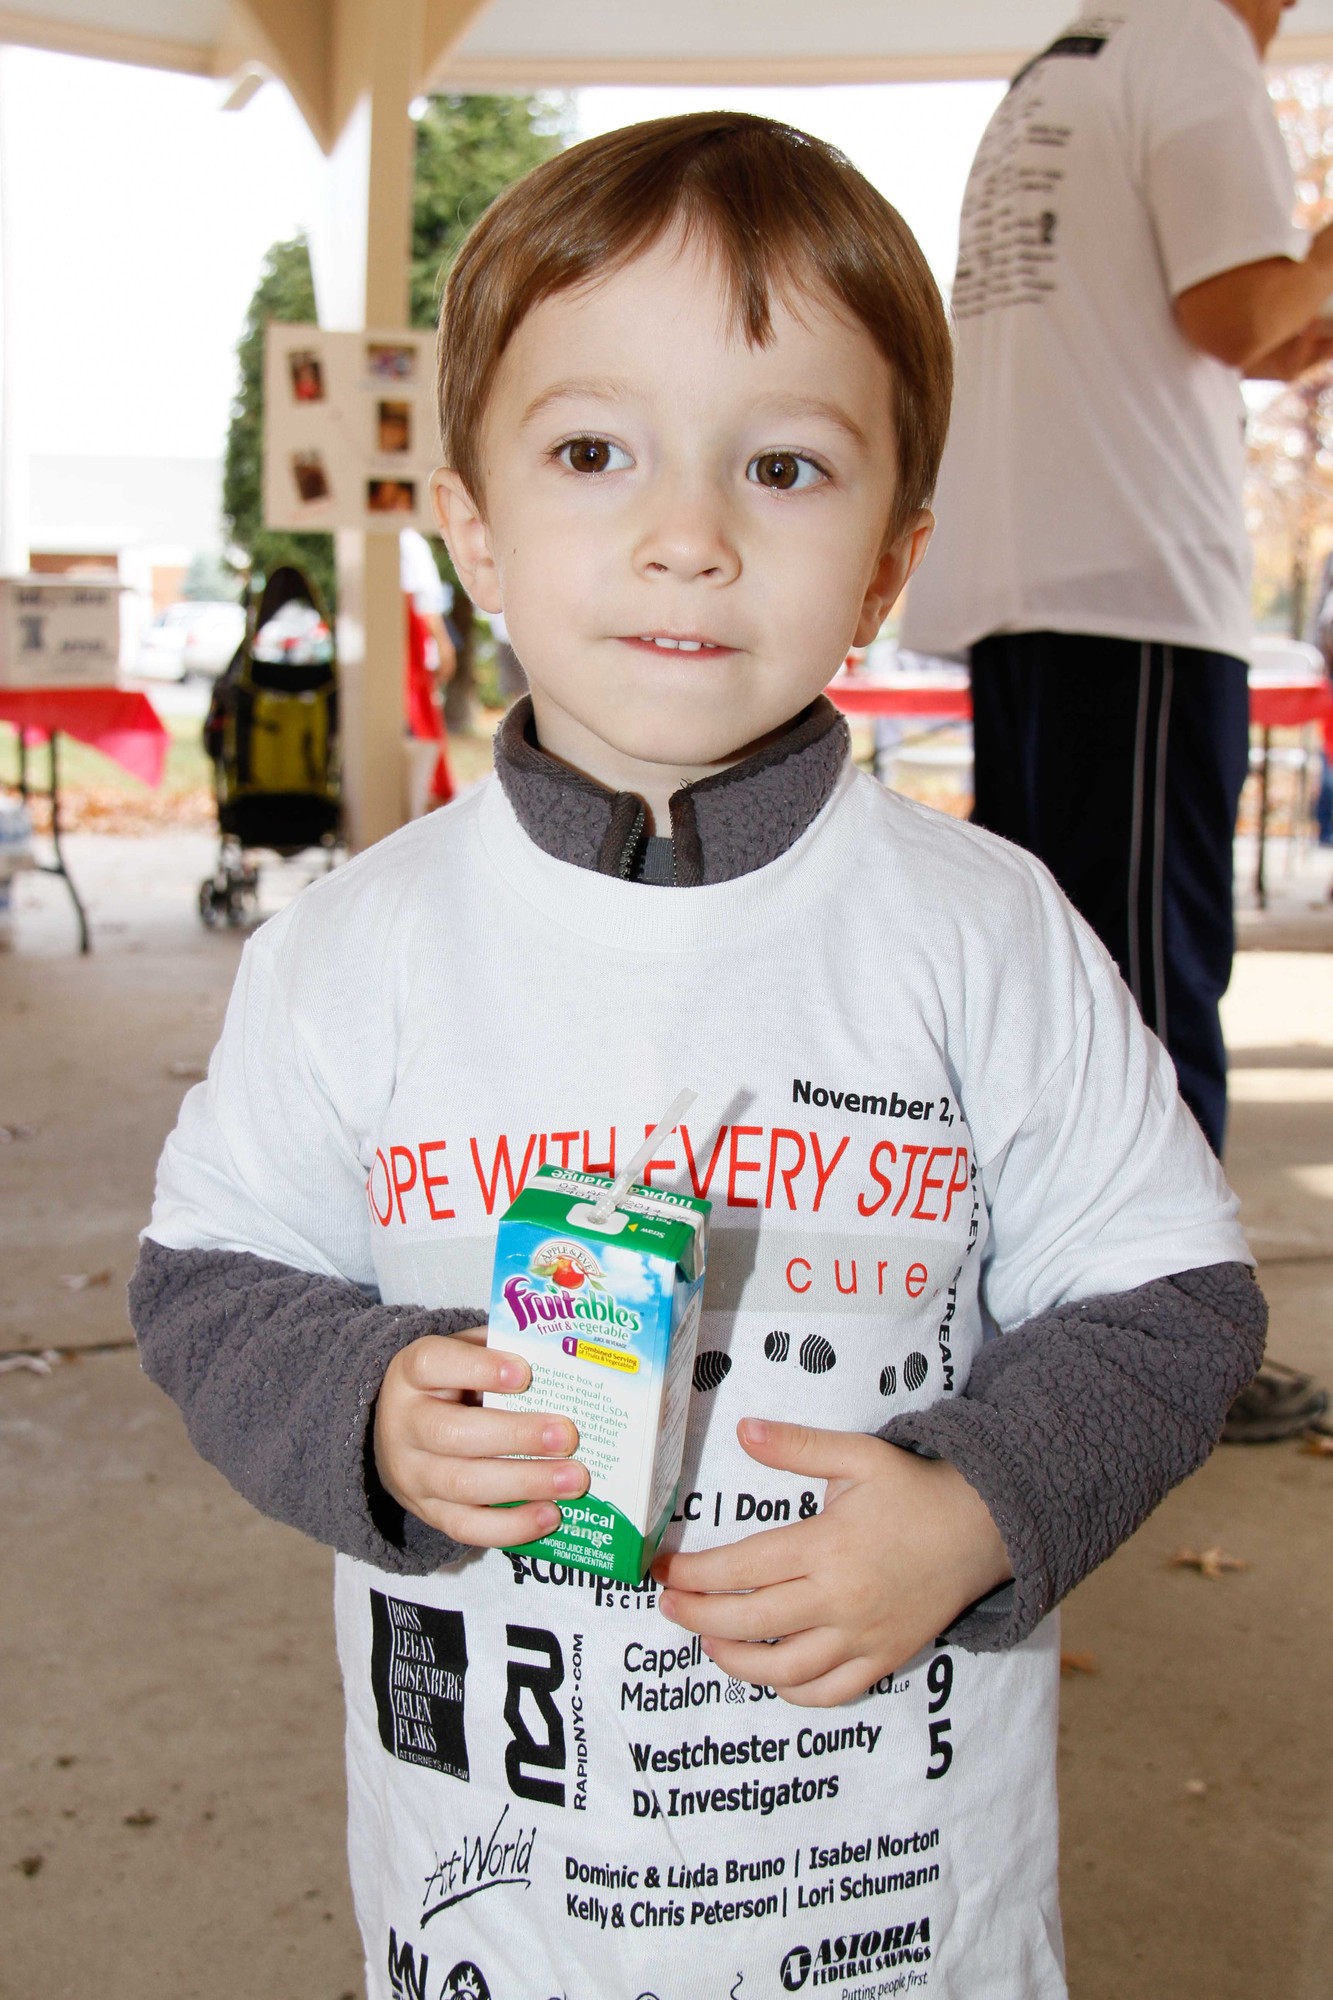 Benjamin Golbig, 3, was one of the youngest walkers.